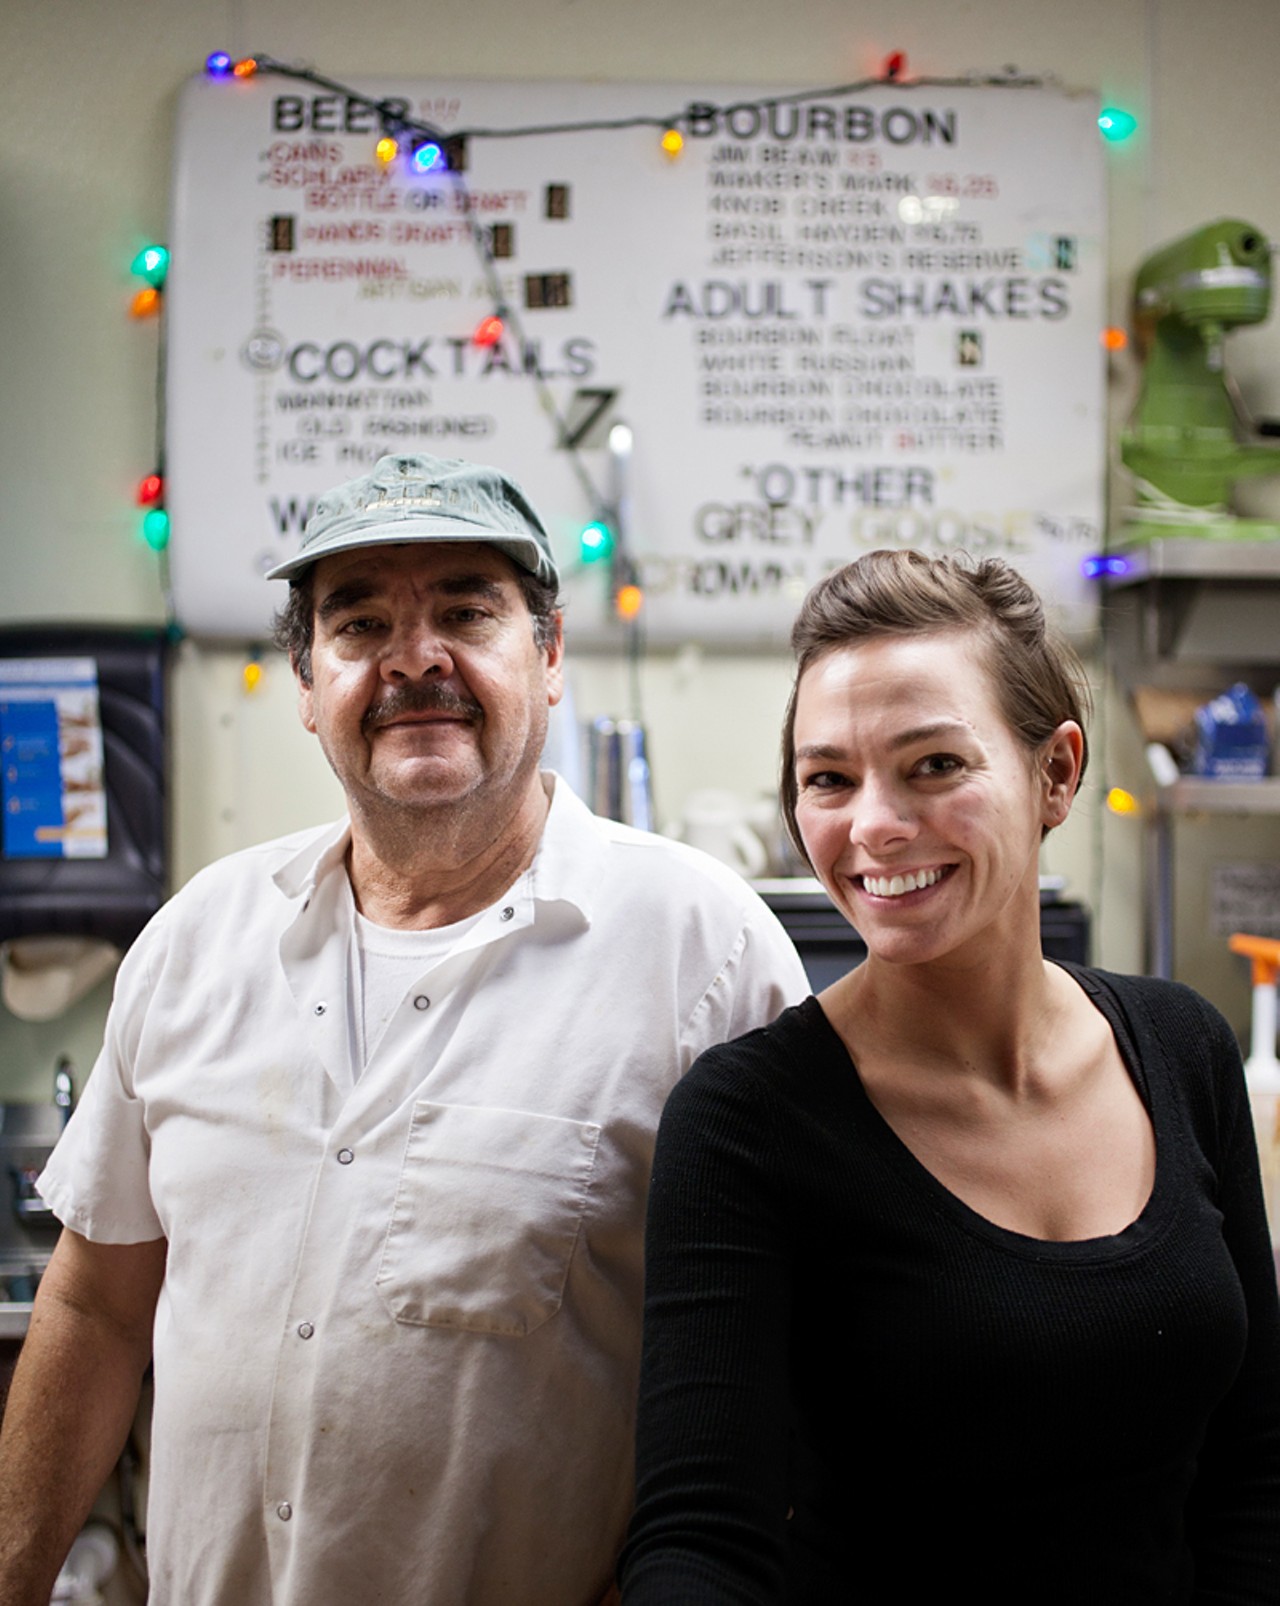 Jose Manuel Romo, dish/prep worker, and Kelly Hale, cashier, at Sugarfire Smoke House in Olivette.